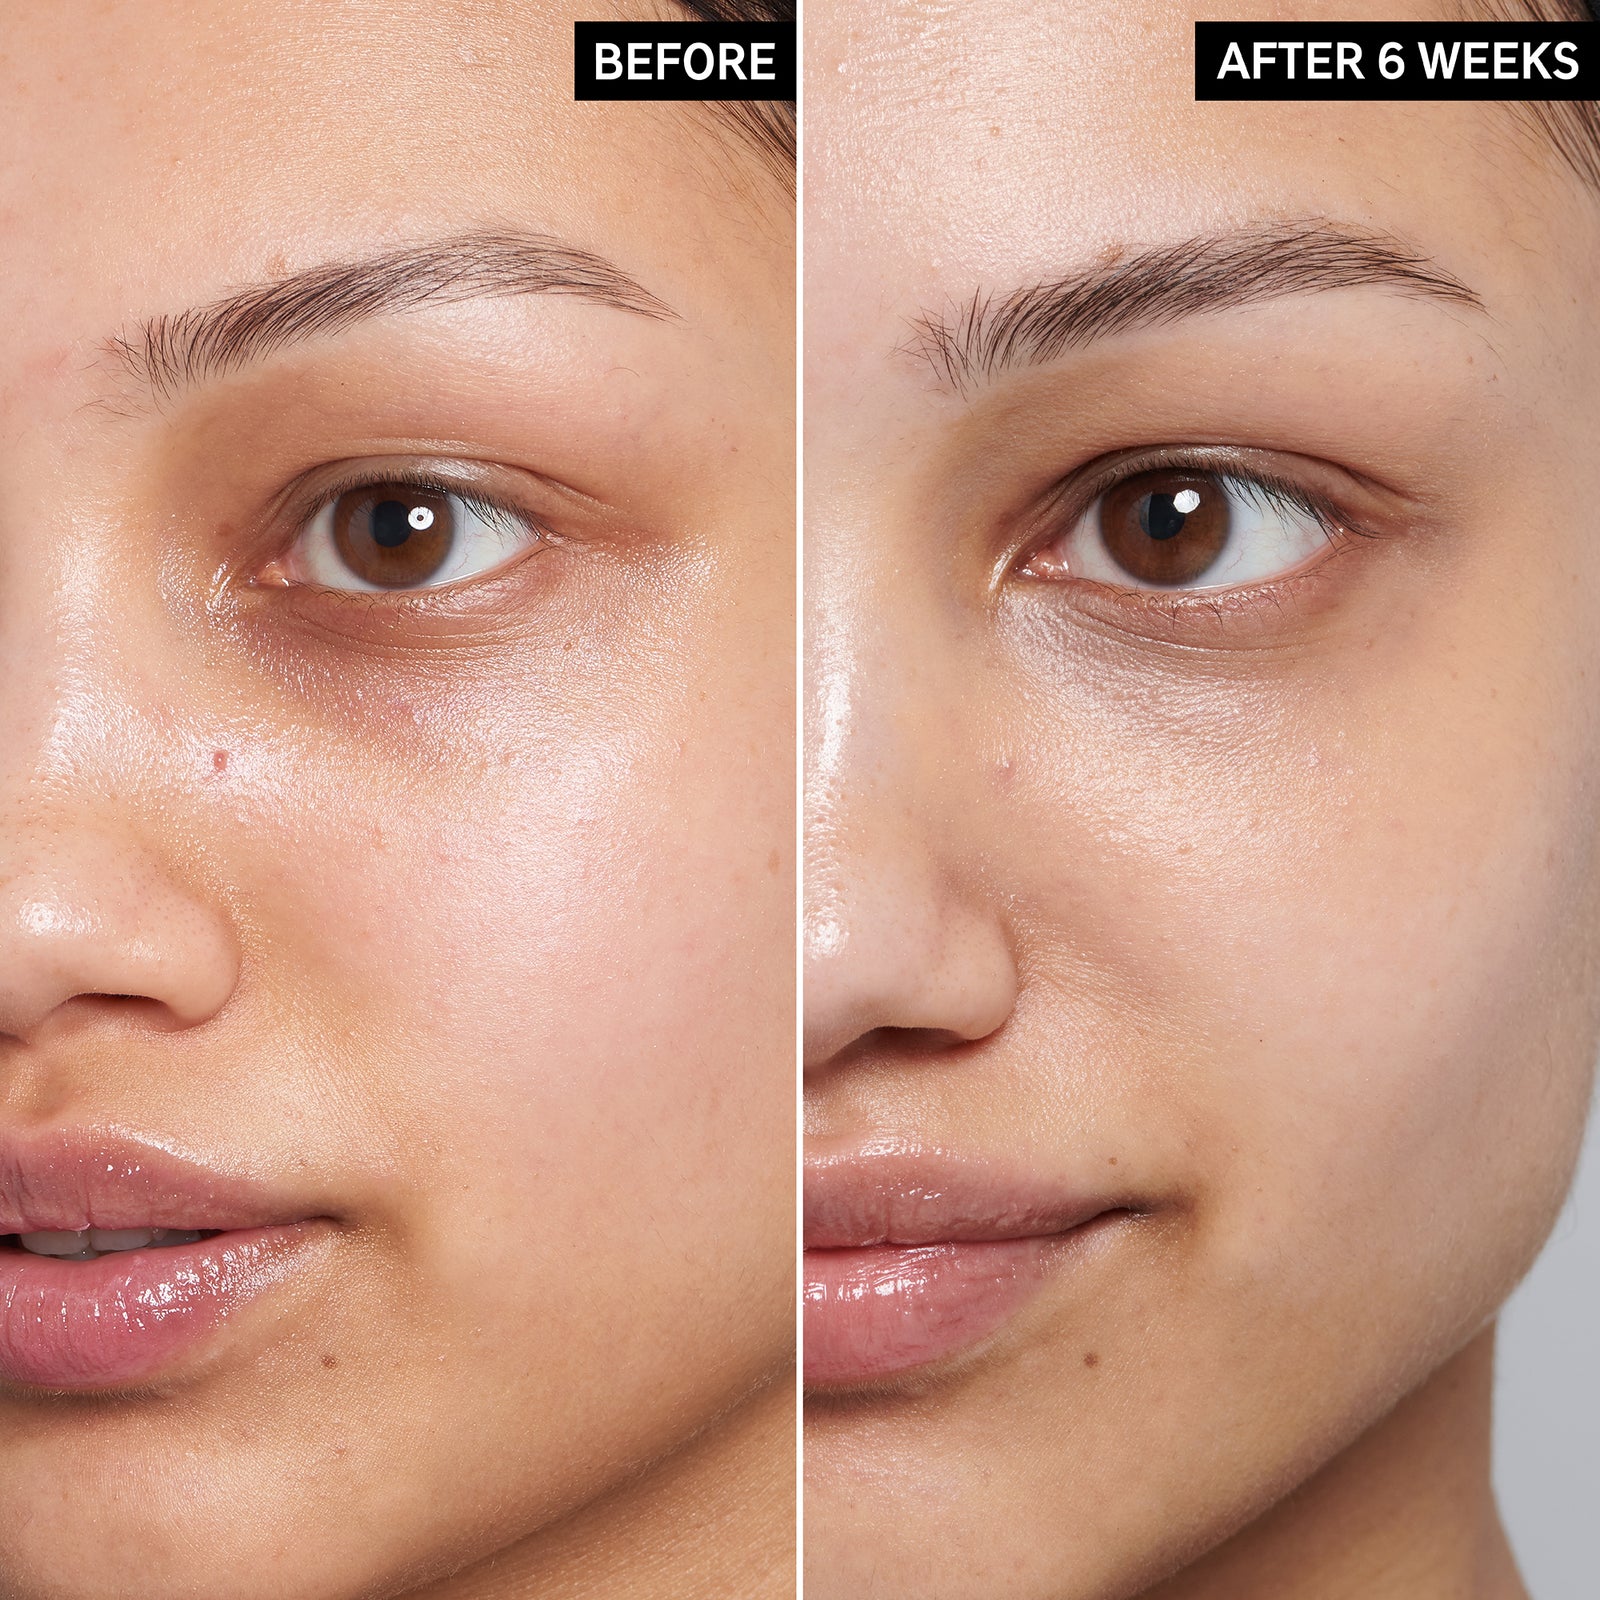 Before and After using Caffeine Eye Cream for 6 weeks